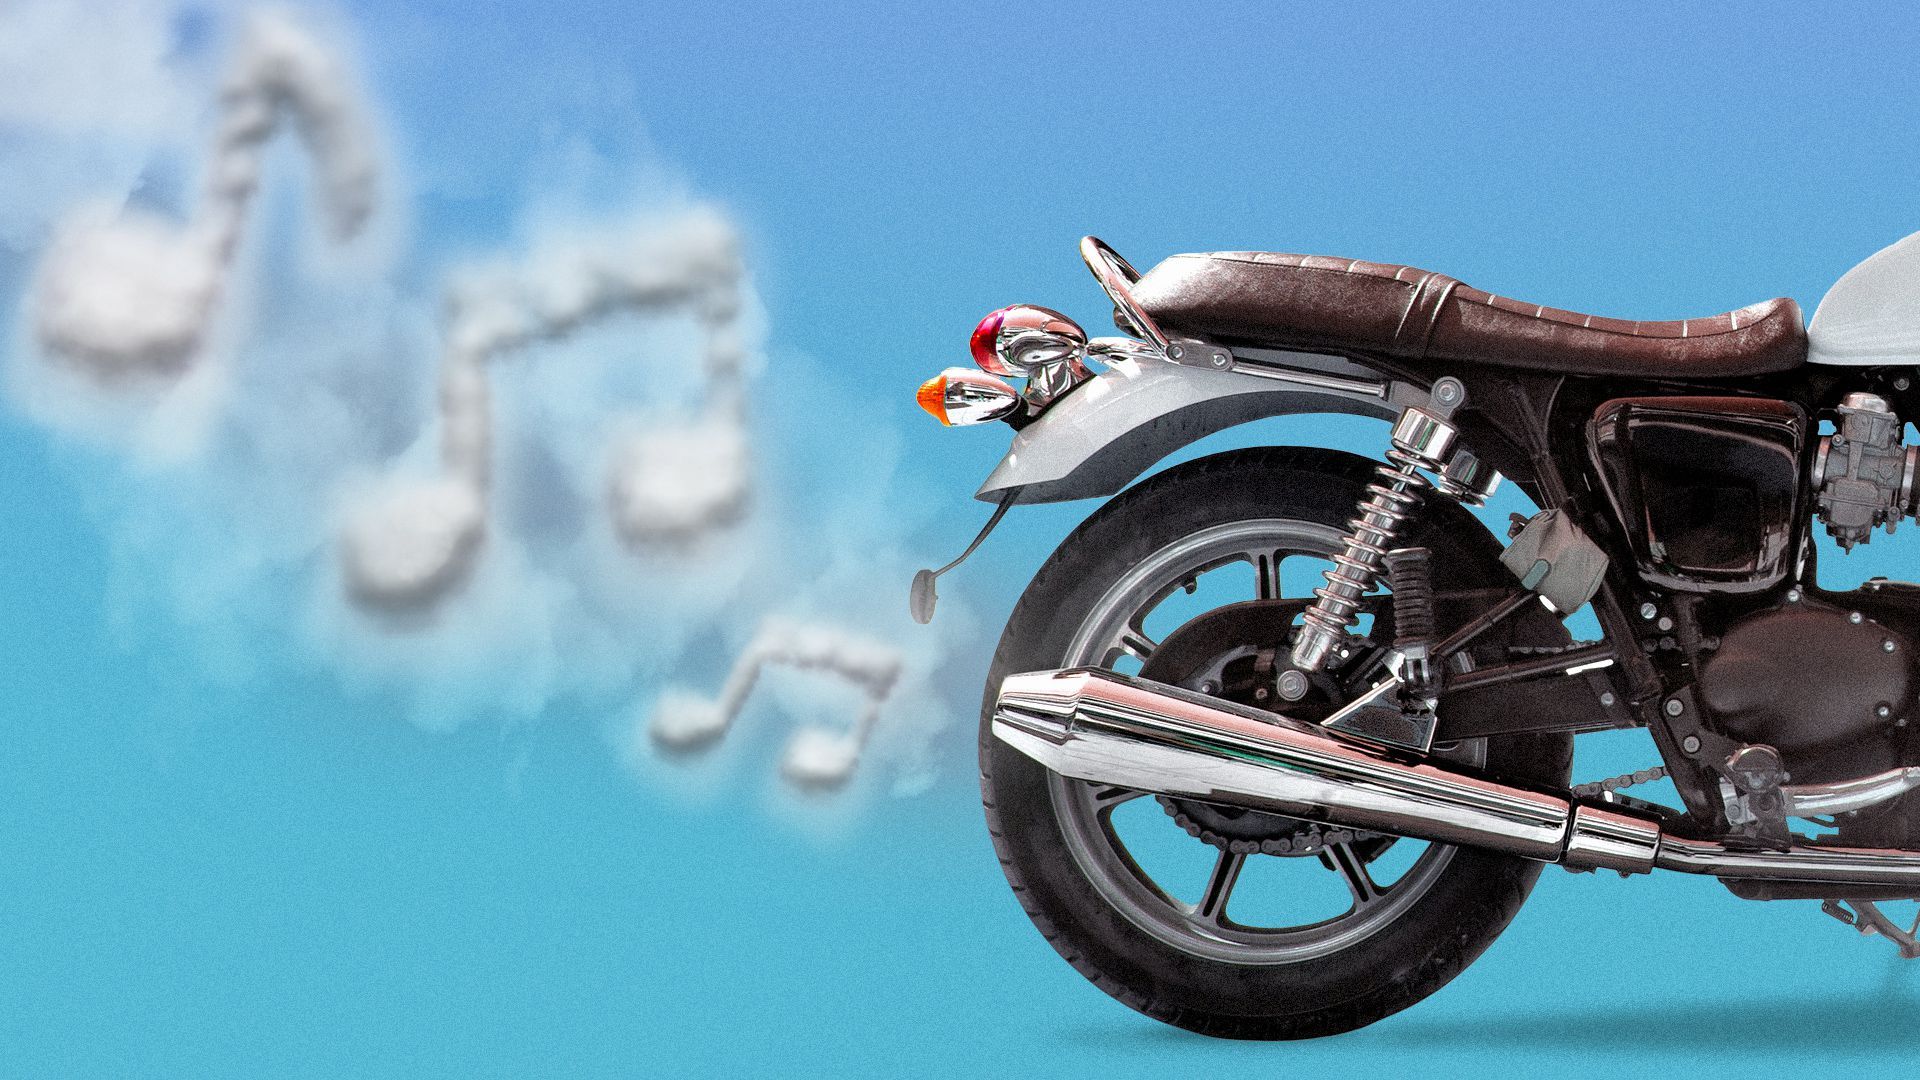 Illustration of a motorcycle with exhaust in the shape of music notes.